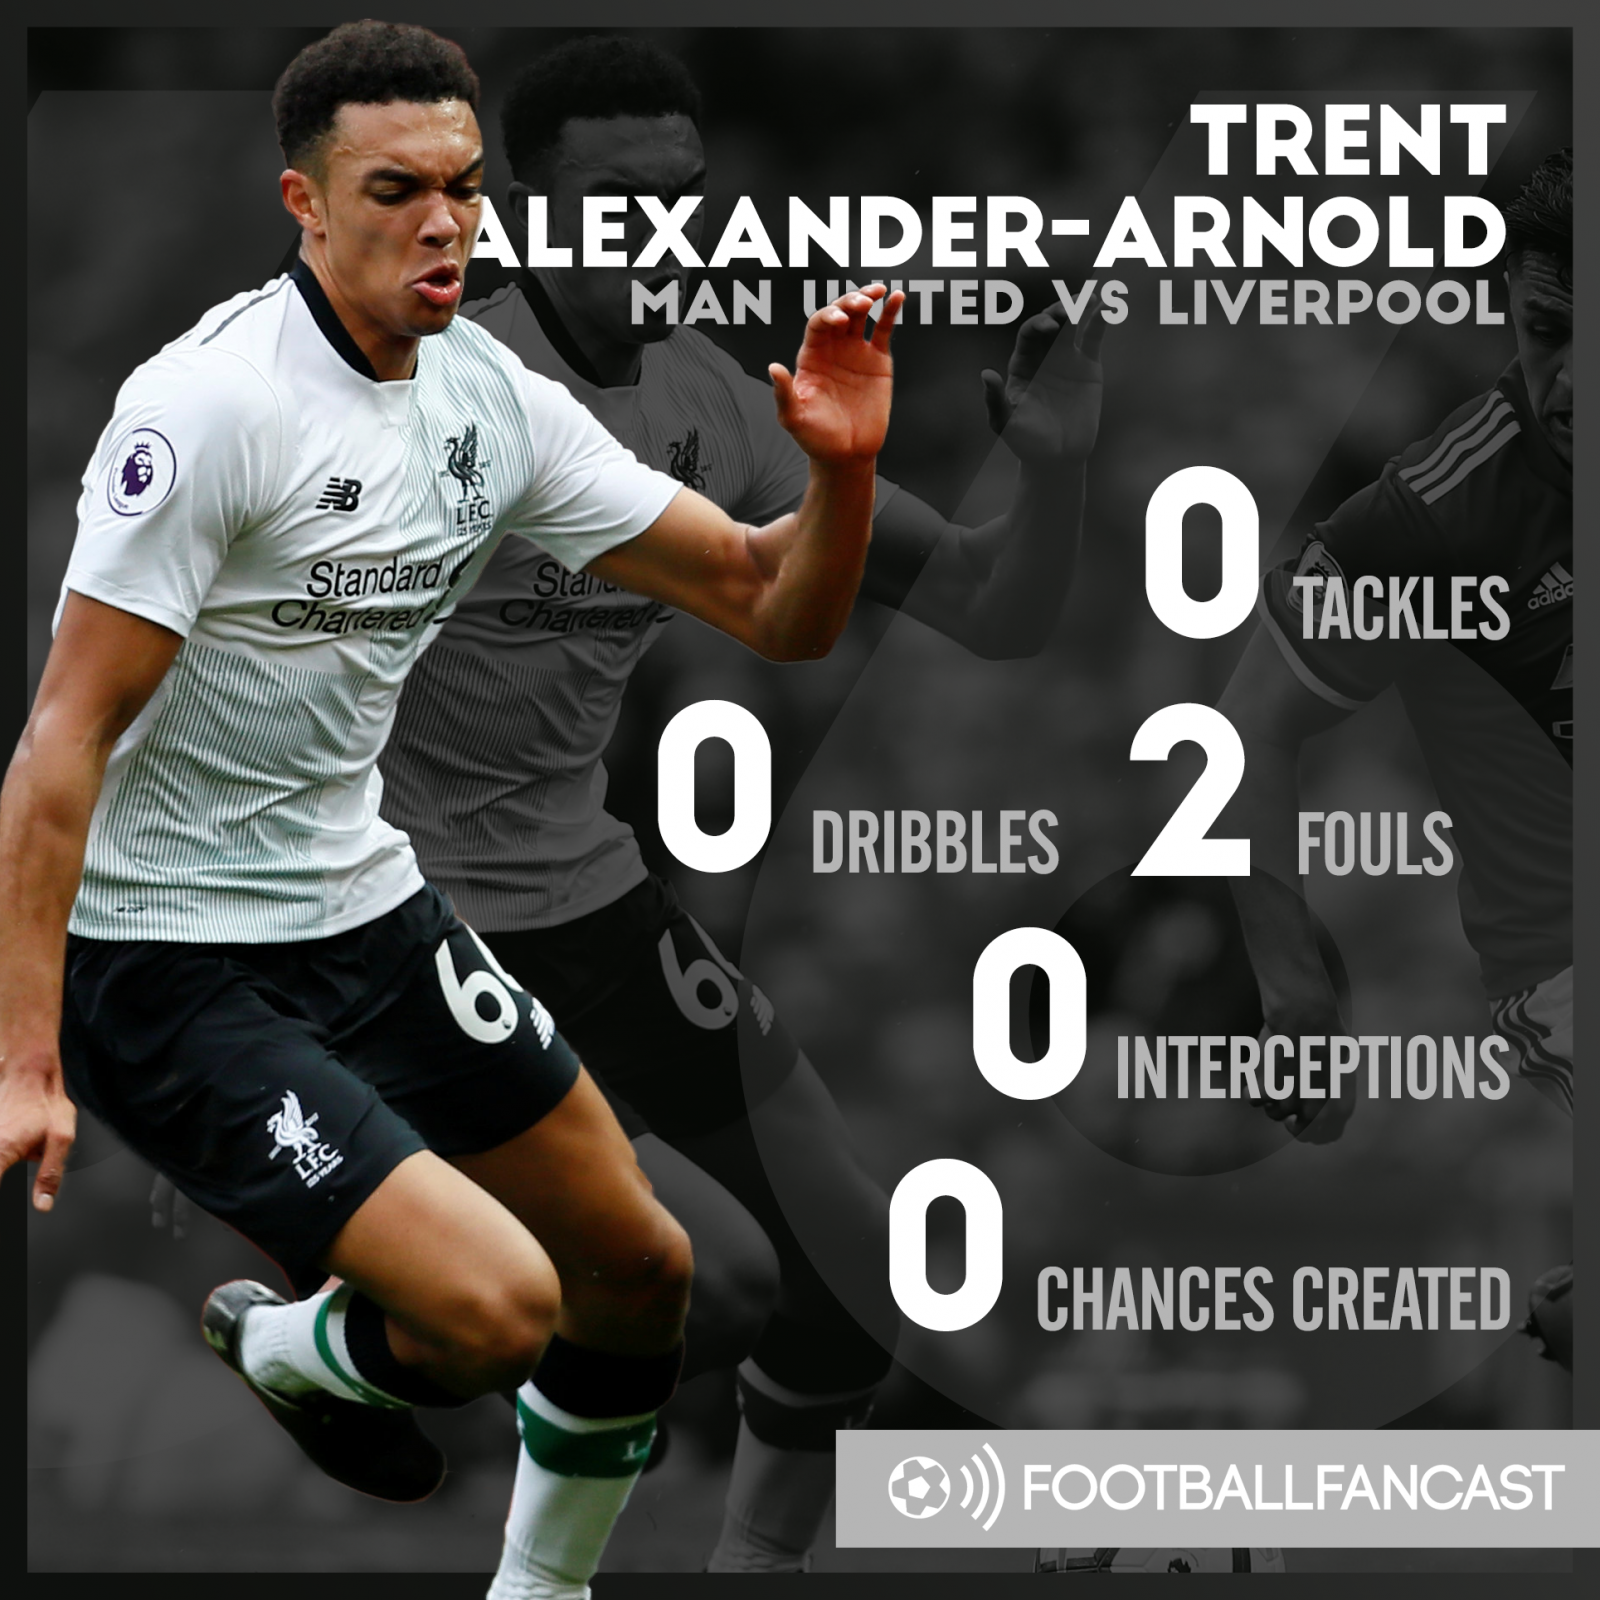 Trent Alexander-Arnold's stats from Liverpool's 2-1 loss to Manchester United